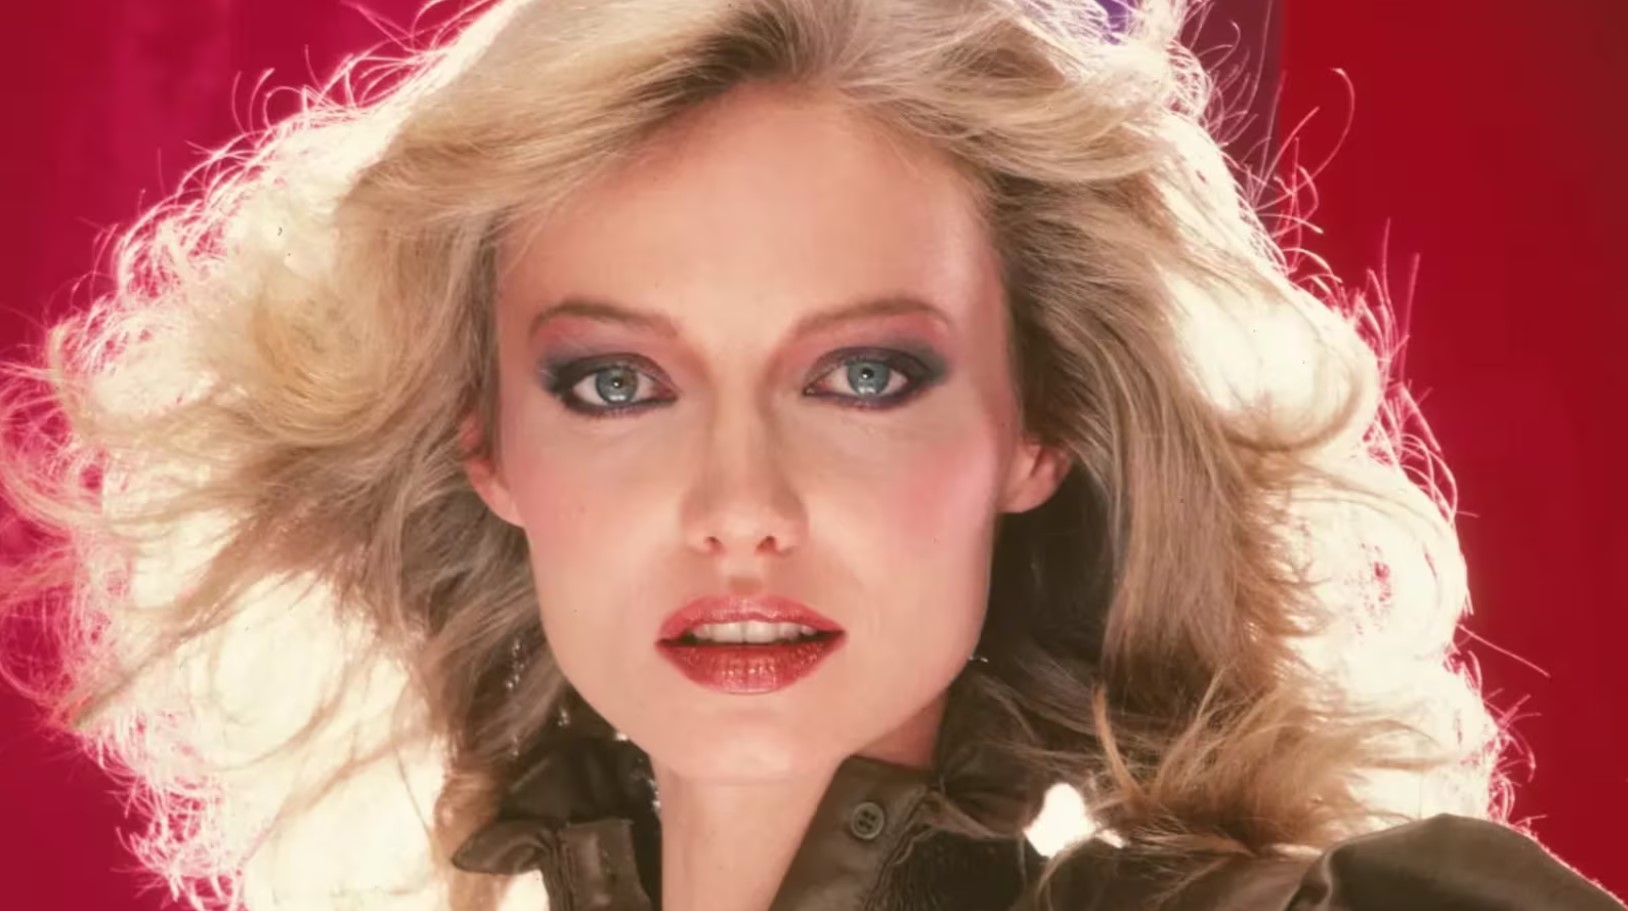 Legendary Actress Cindy Morgan, Star of ‘Tron’ and ‘Caddyshack,’ Dies at 69